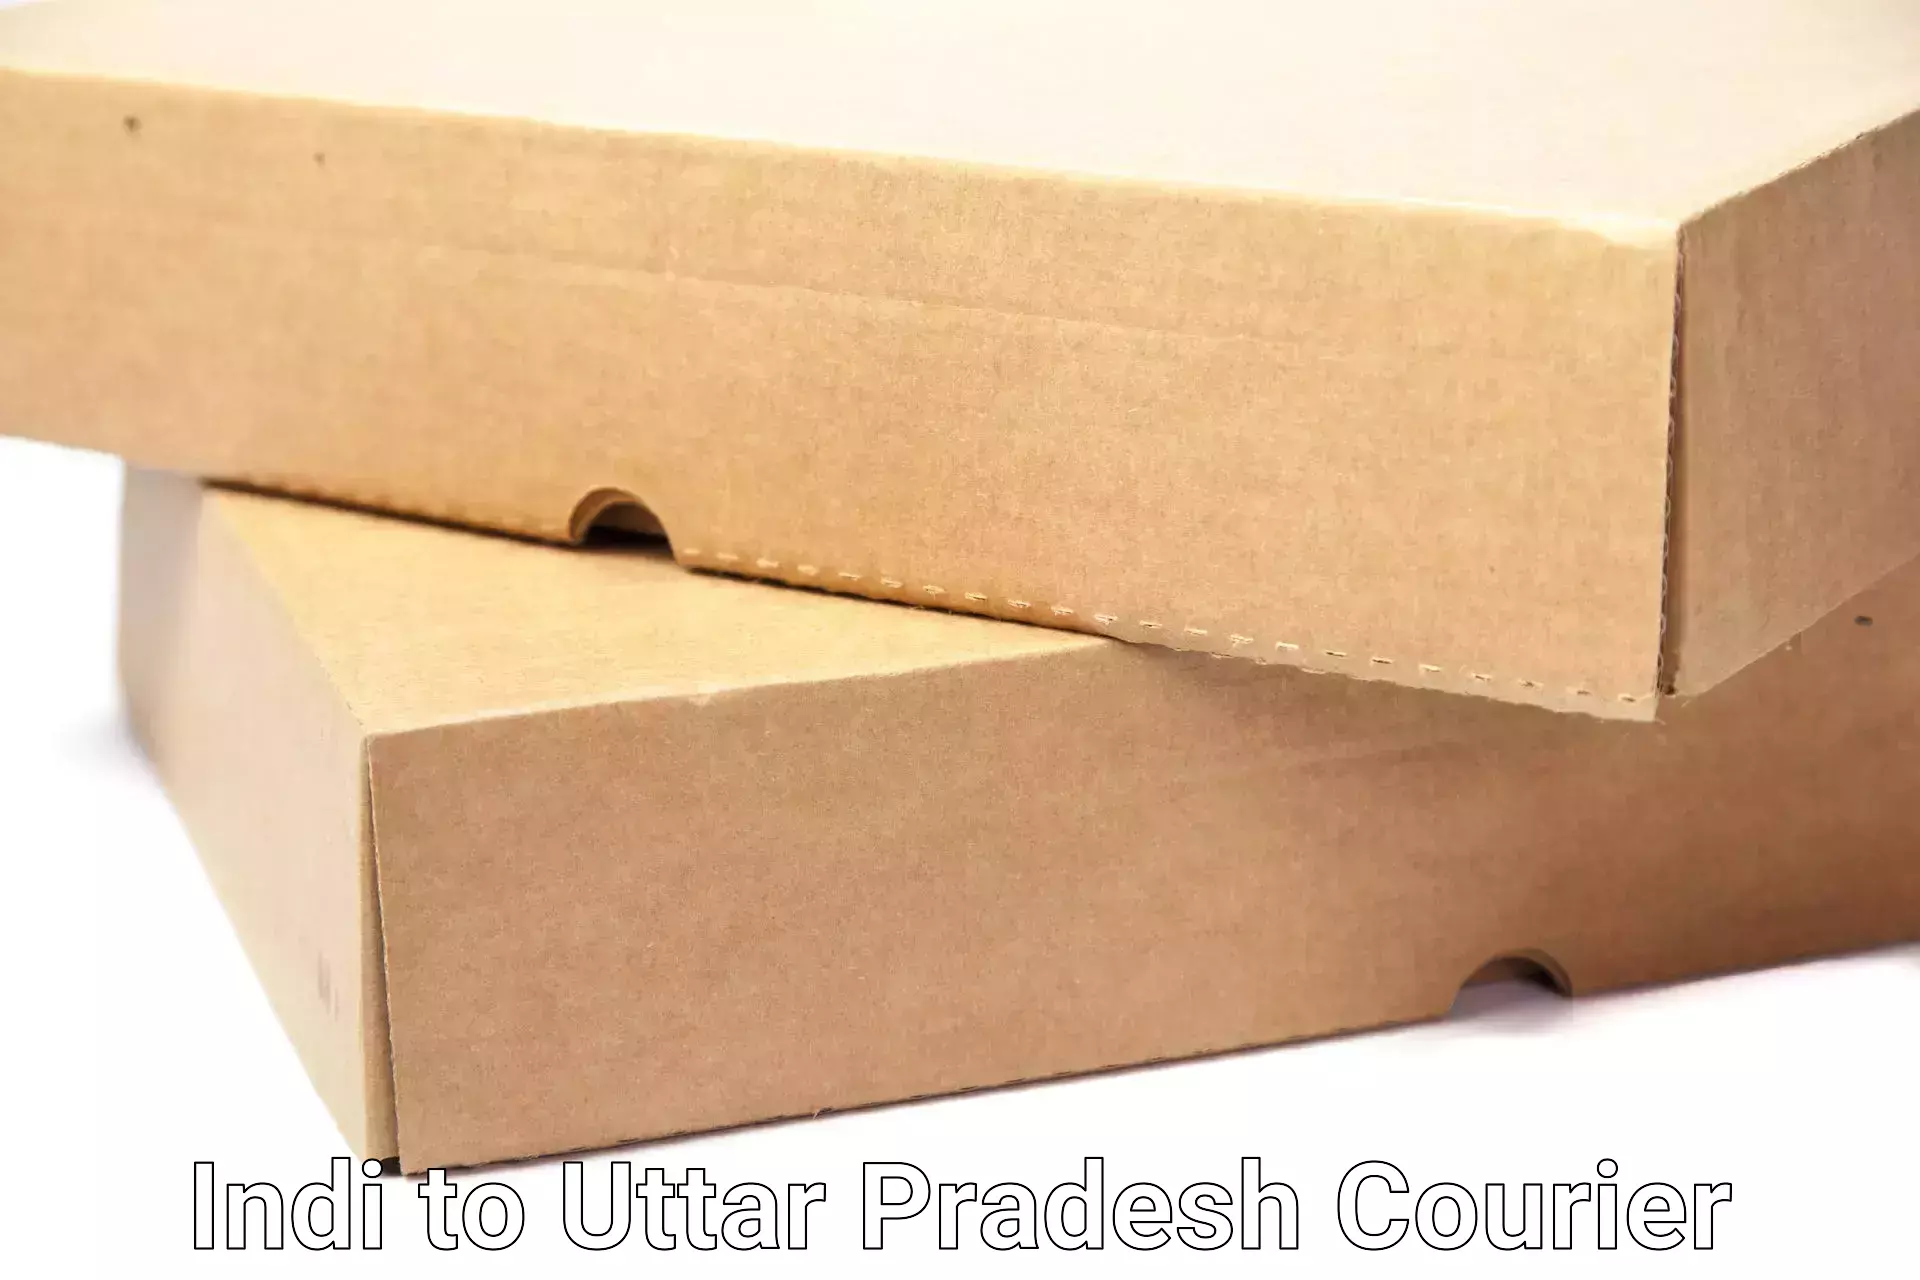 Home moving specialists Indi to Uttar Pradesh